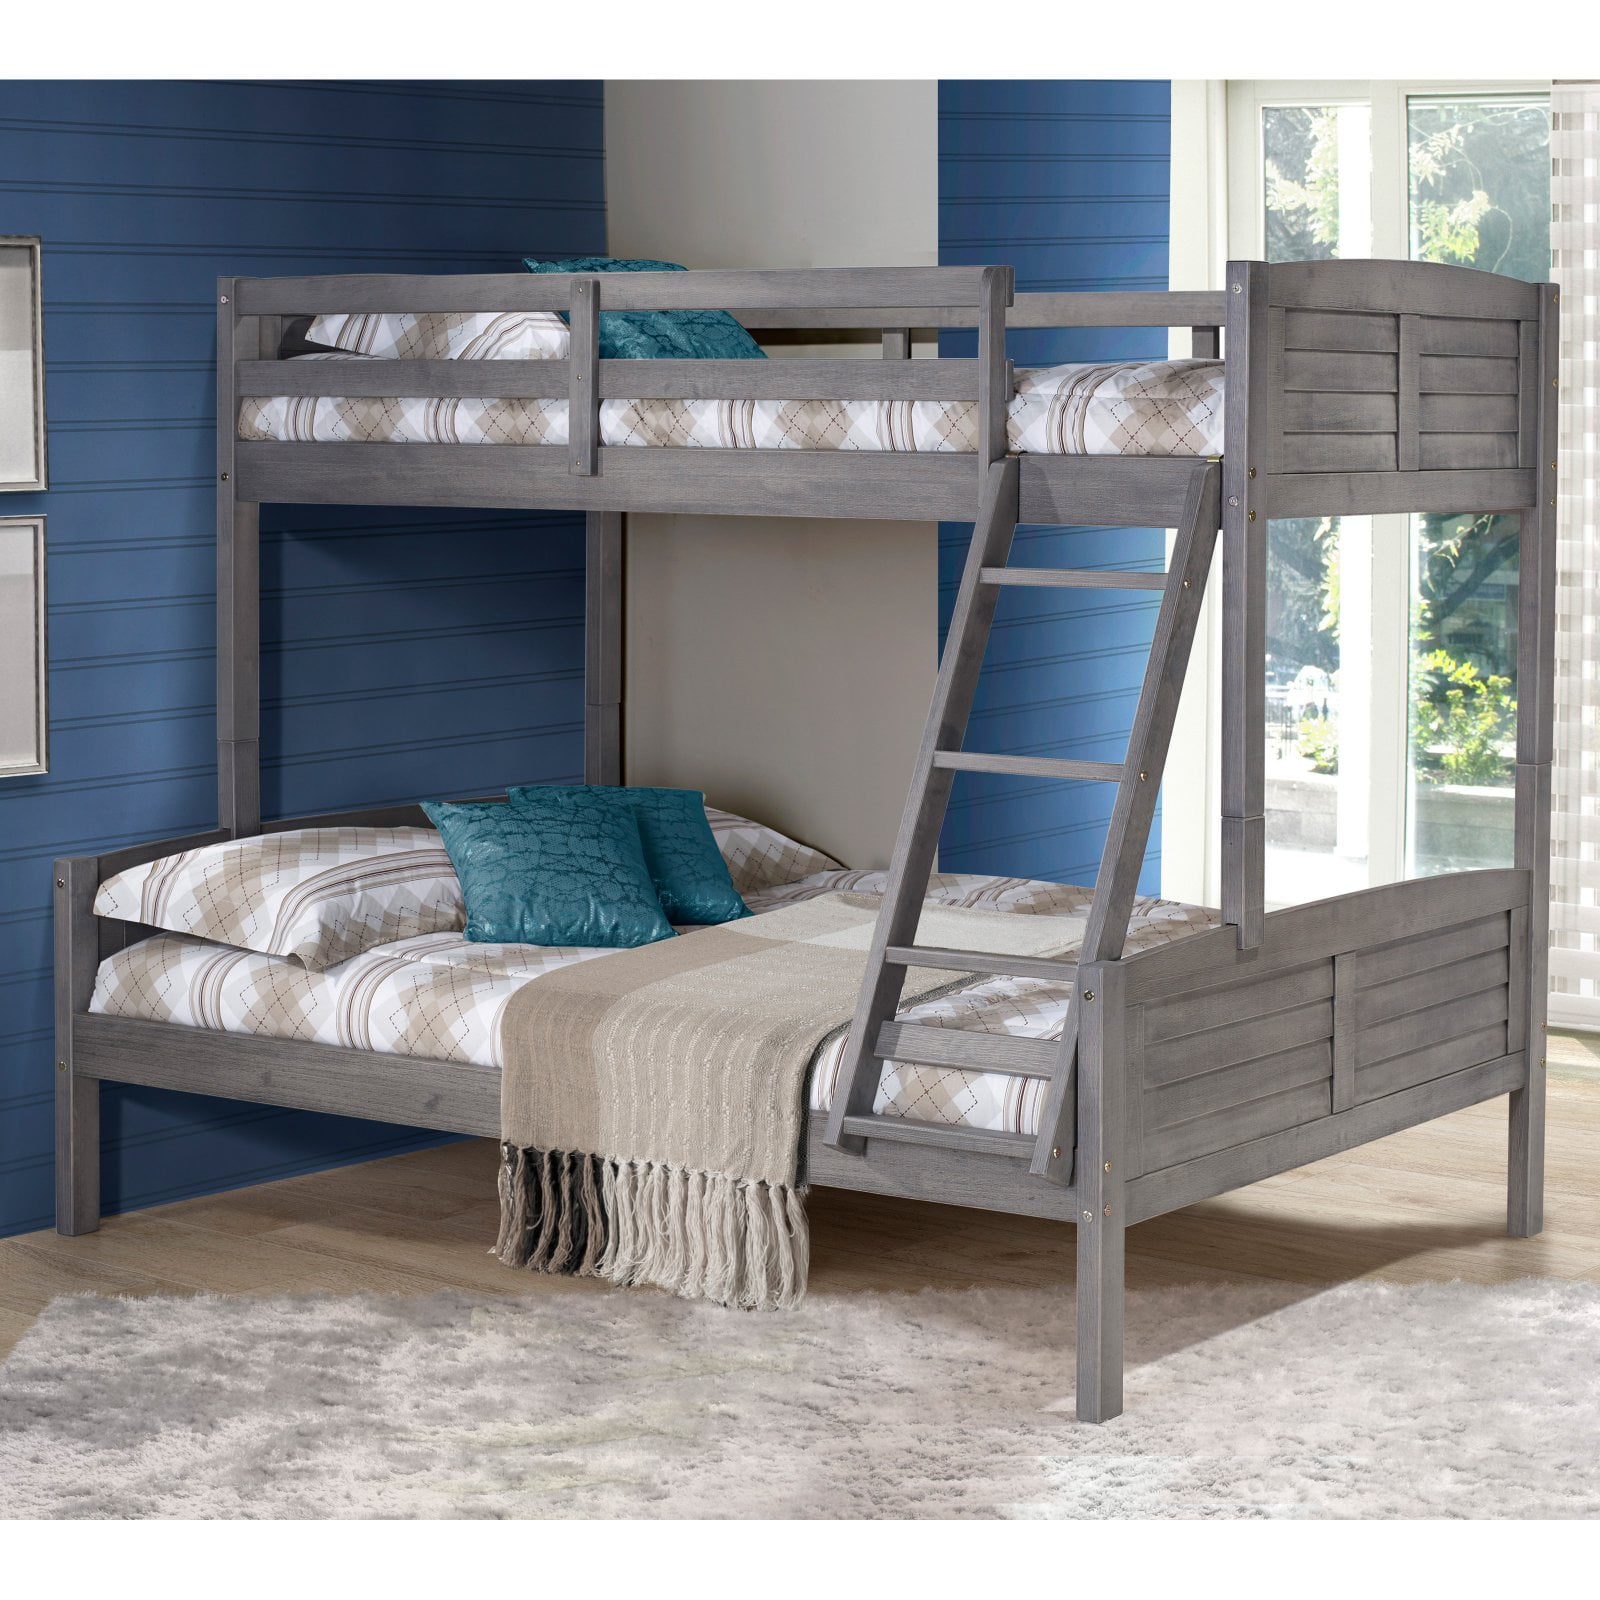 Donco Kids Louver Wood Bunk Bed Twin, Wooden Bunk Bed Full And Twin